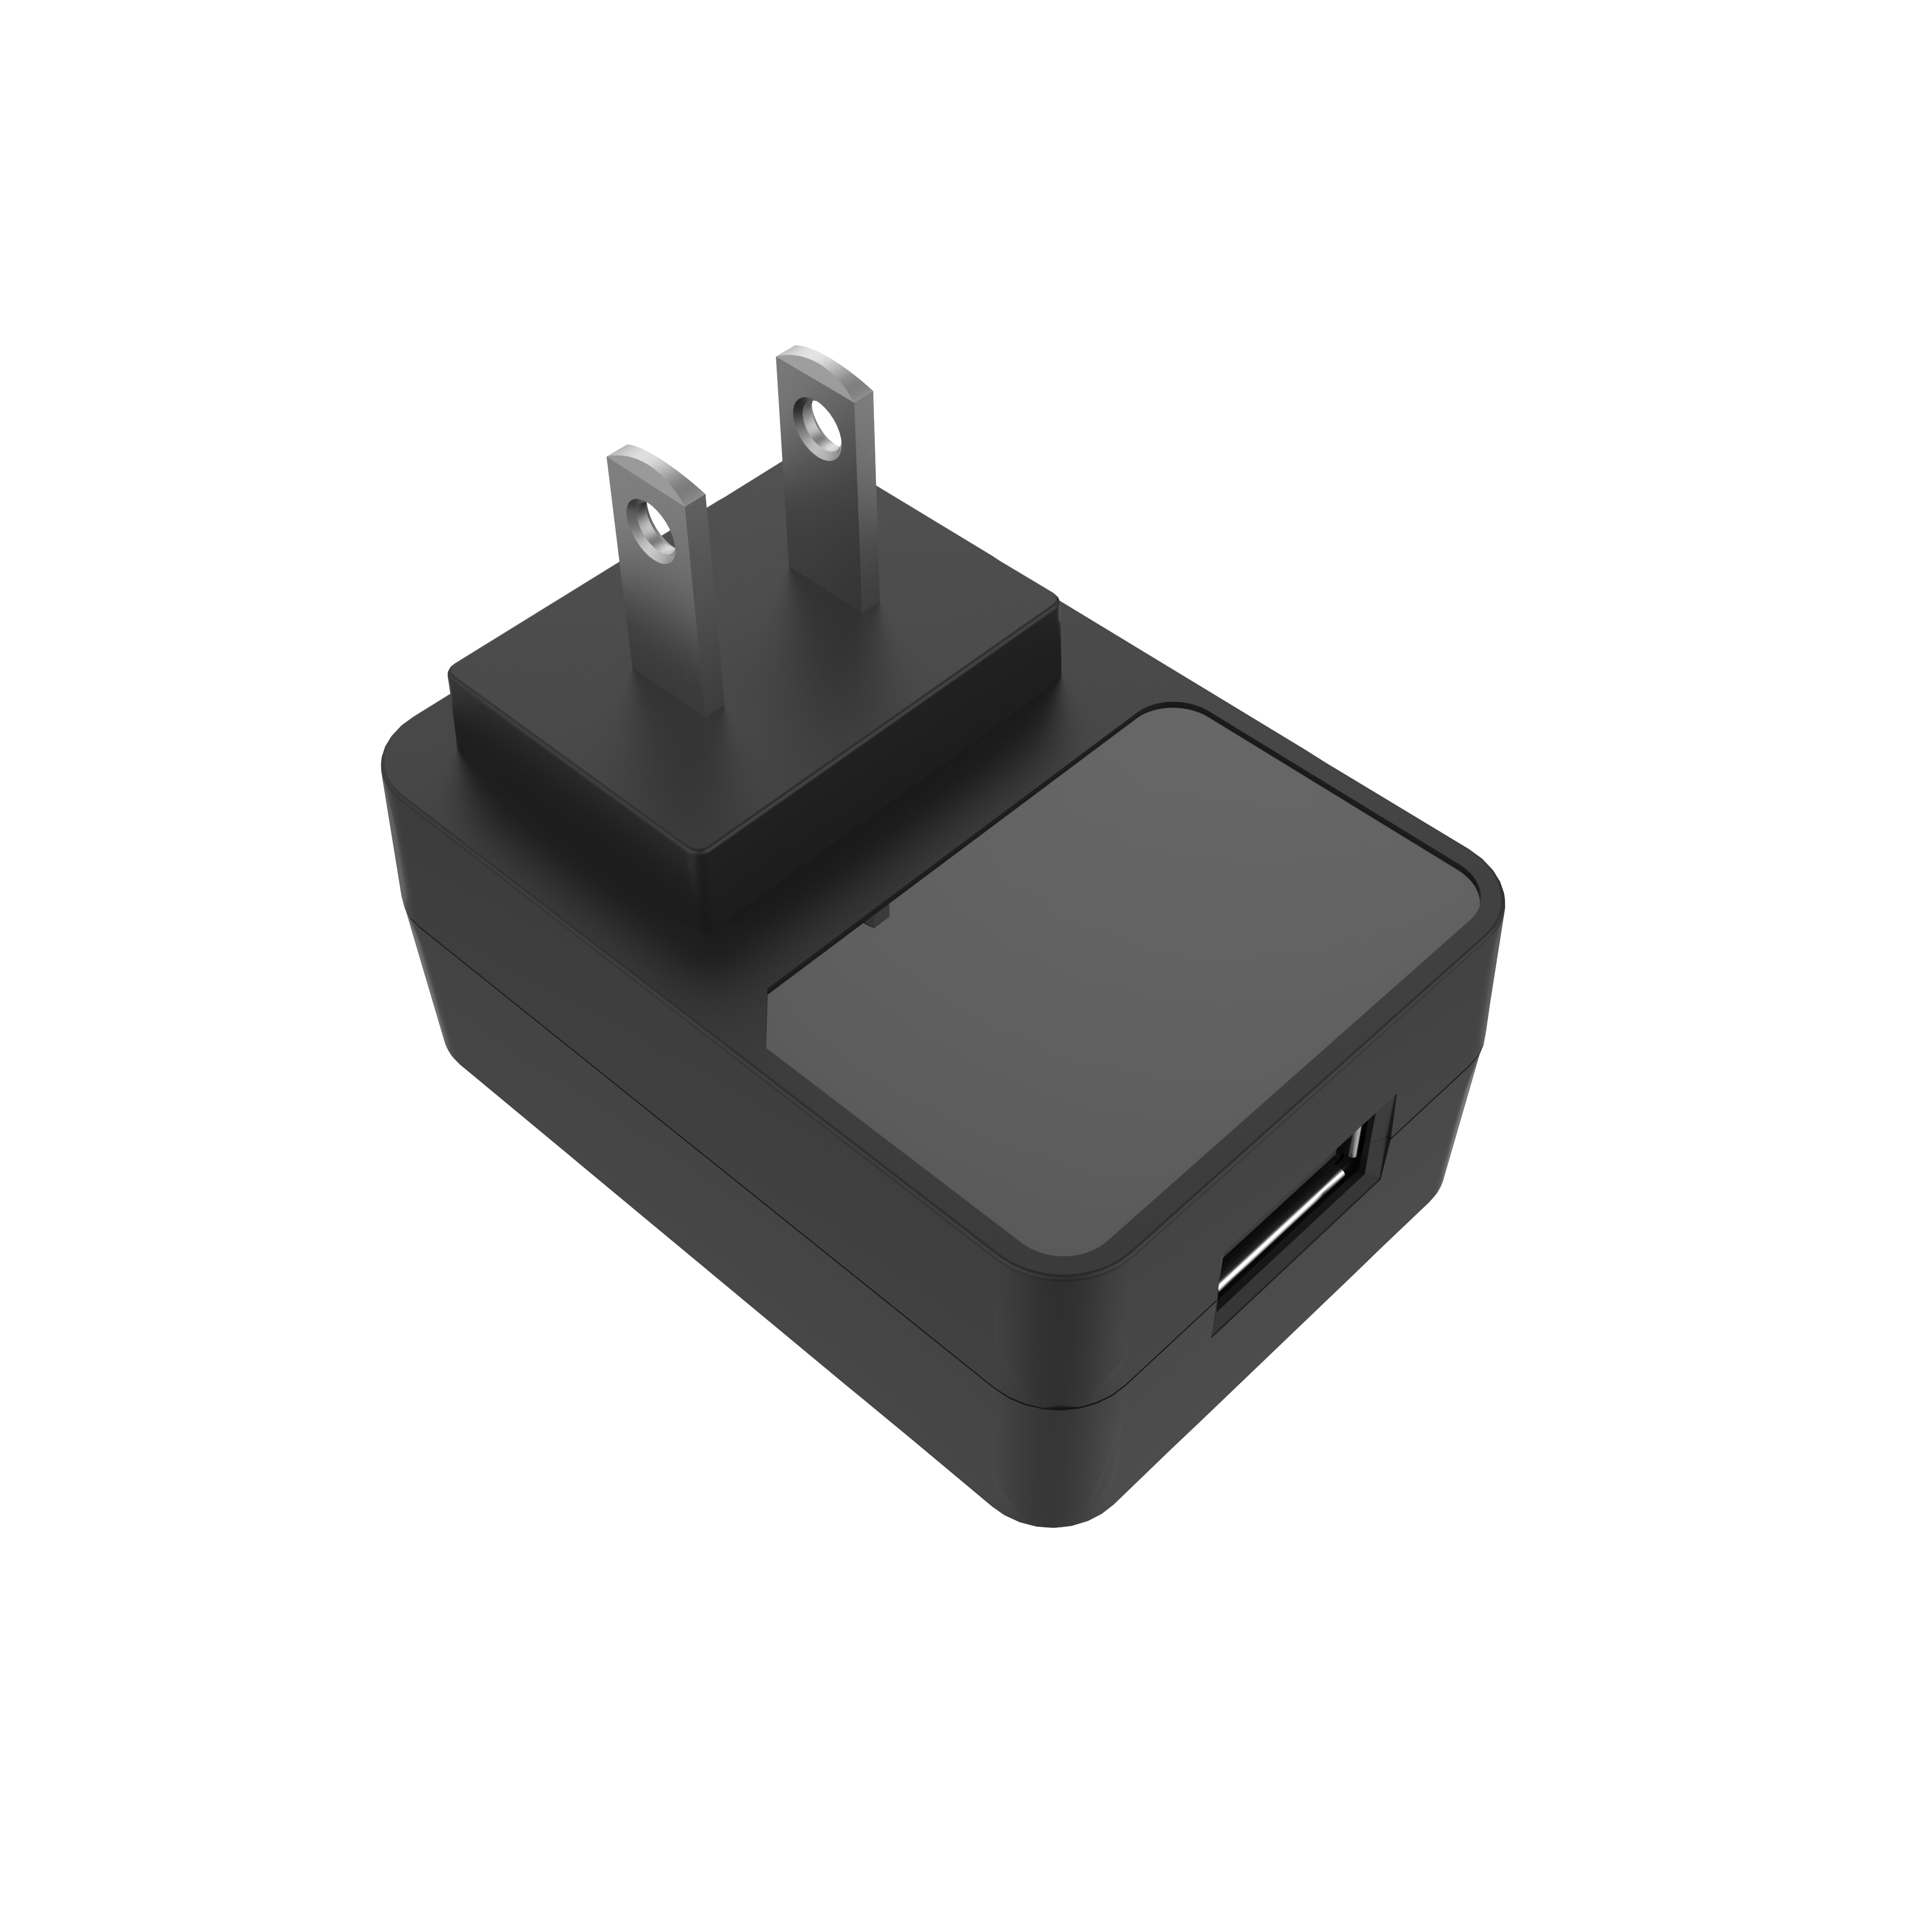 5v1a portable USB power adapter 5V 1.5A 2A 2.4A 2.5A 3A charger for smart phones, watch, electric door ring